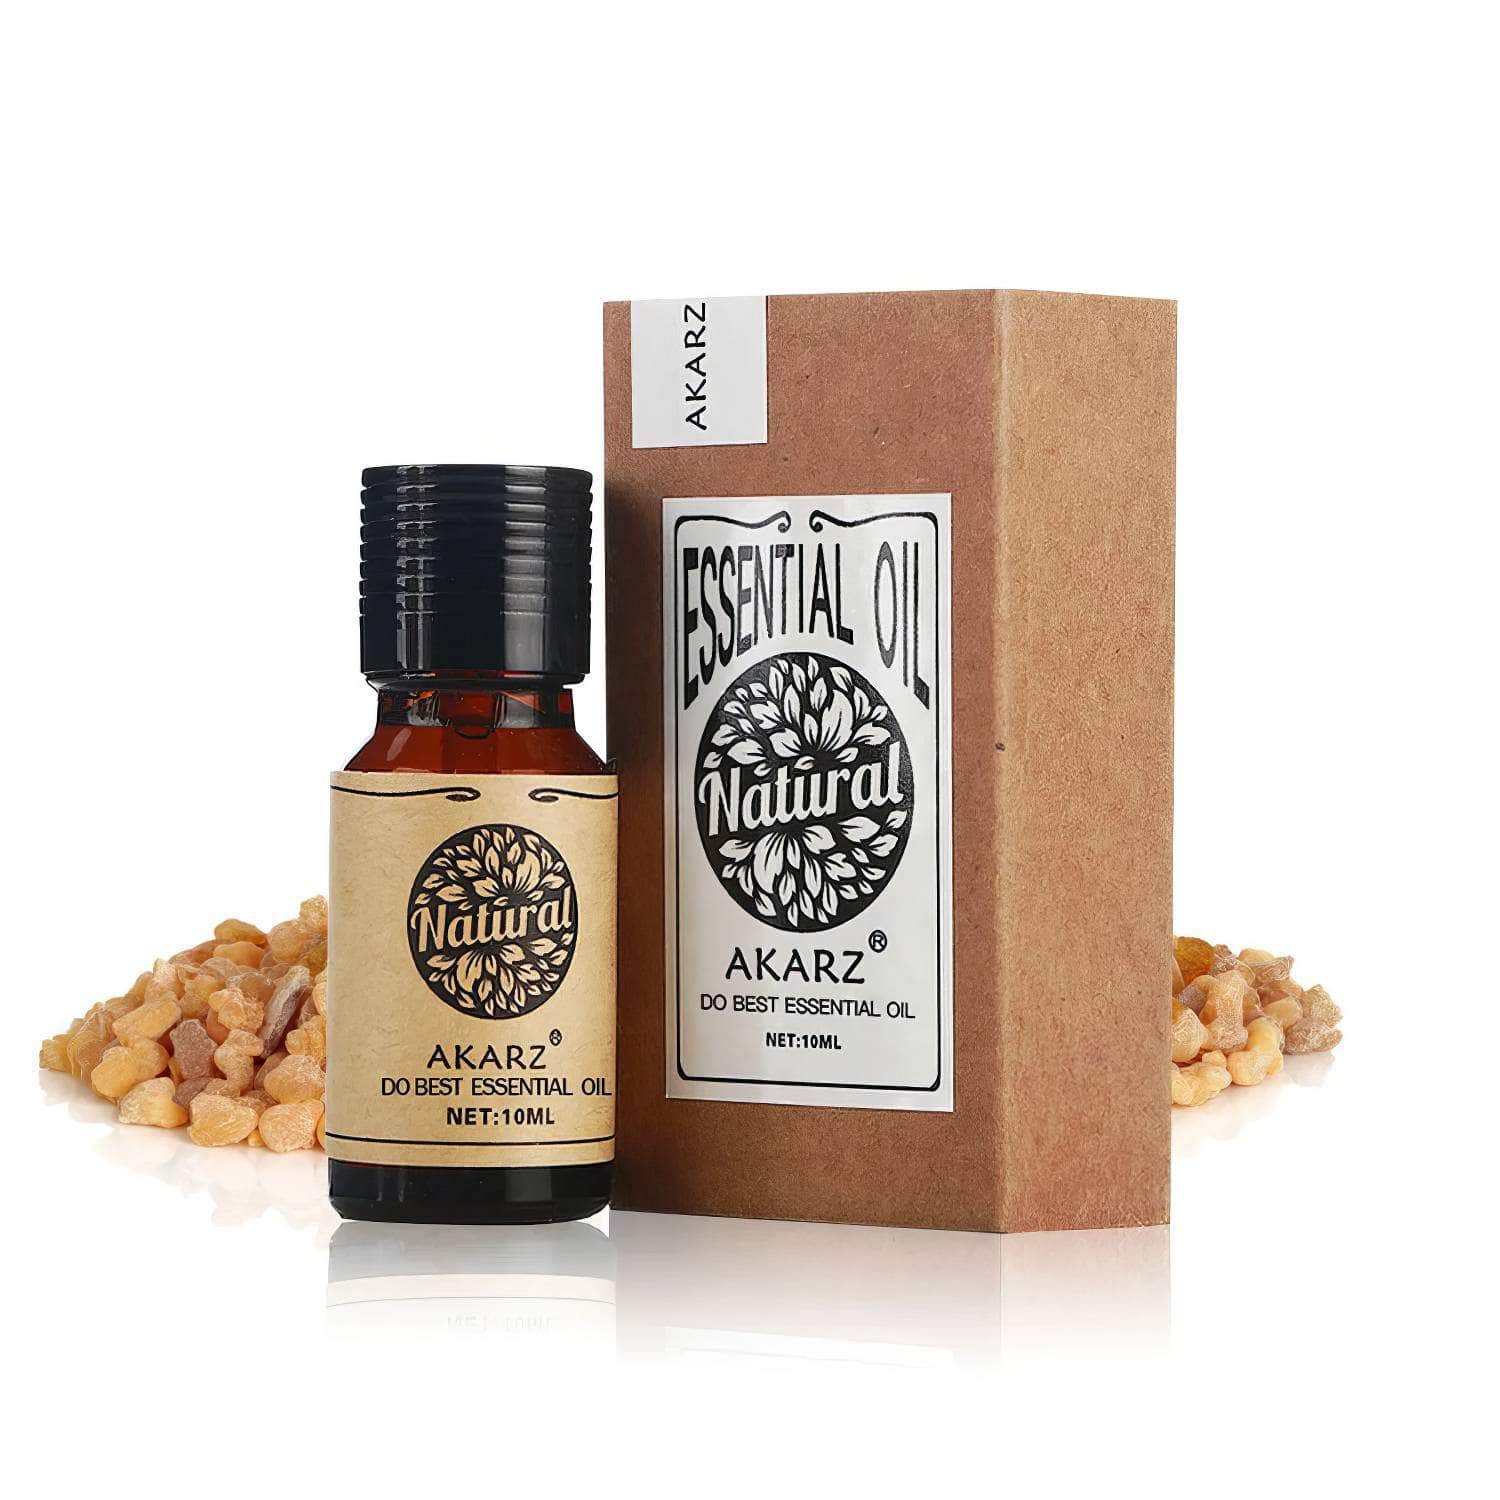 AKARZ™ Frankincense Essential Oil: Natural Anti-Aging, Restores Skin Elasticity, Balances Grease, Relaxes, Removes Odor